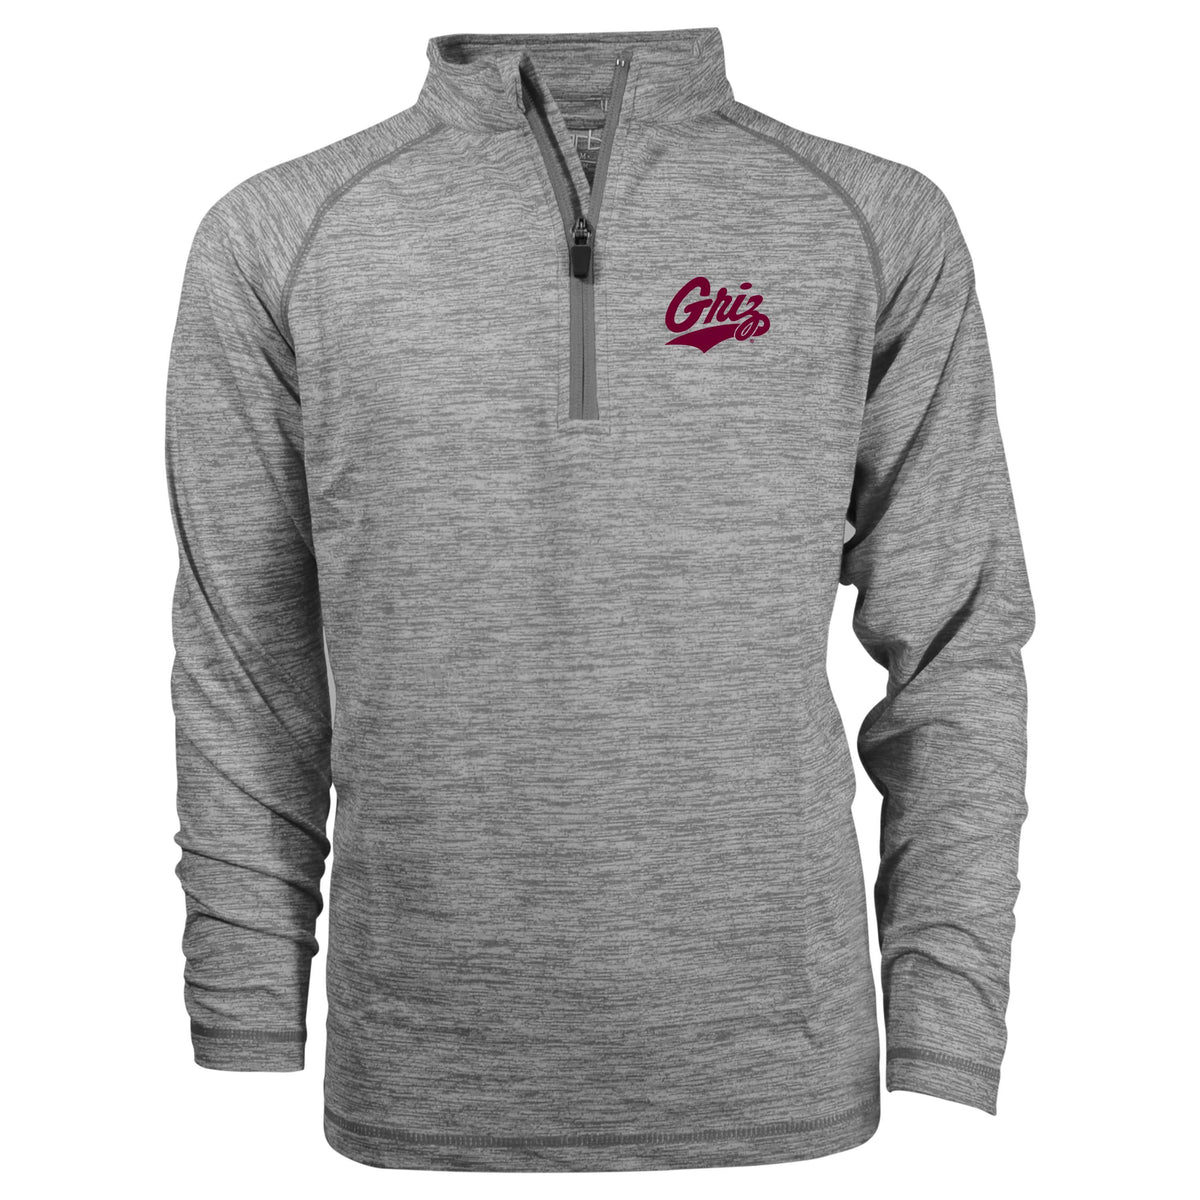 Montana Grizzlies Youth Boys' 1/4-Zip Pullover